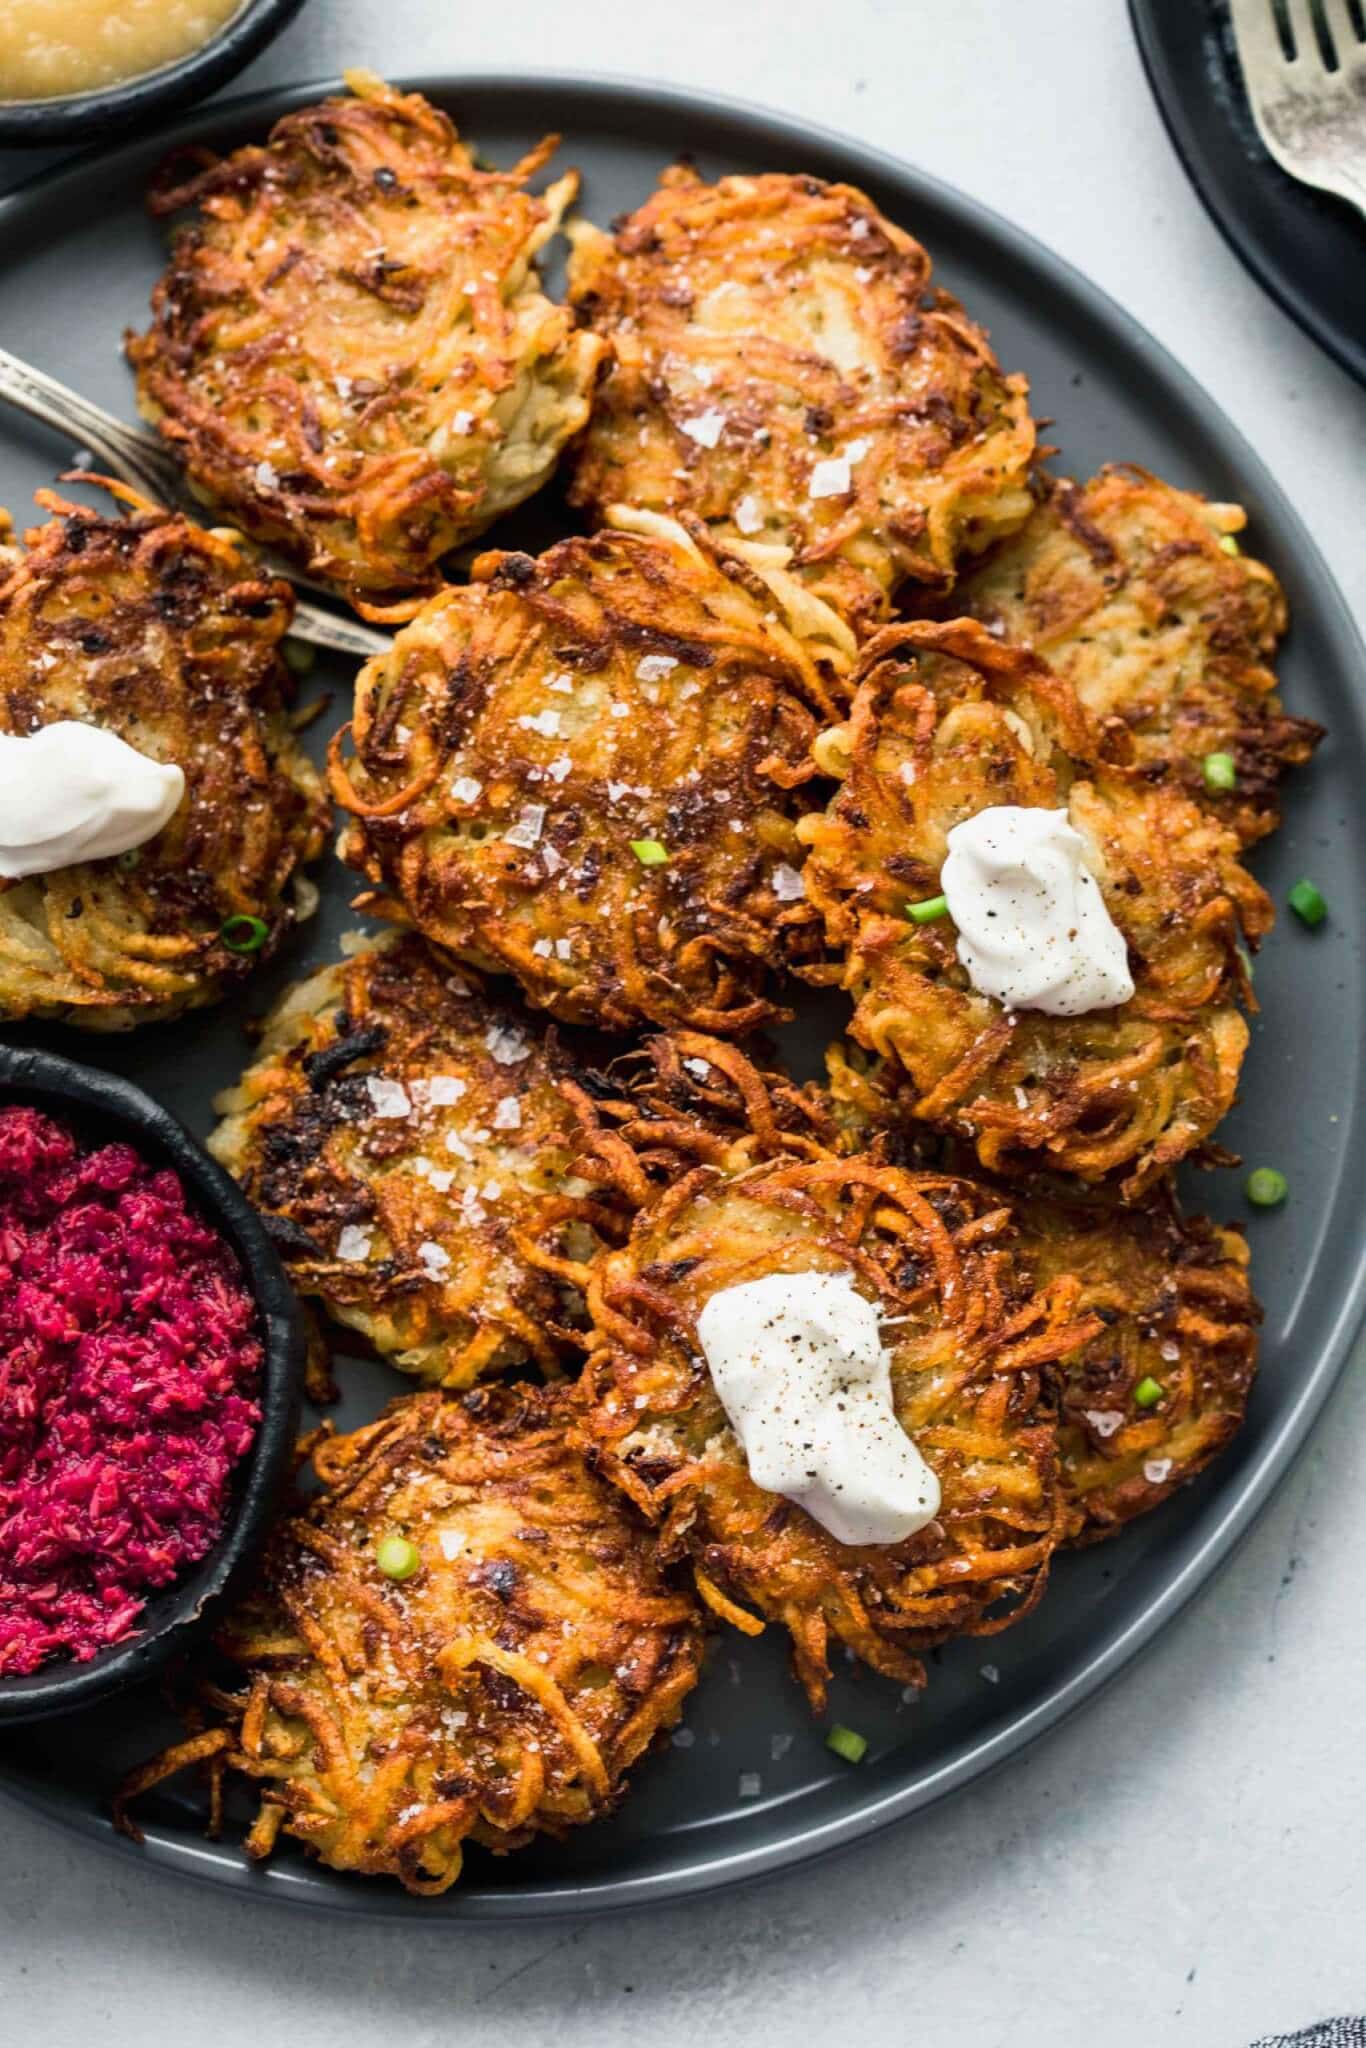 POTATO LATKES ON GREY PLATE TOPPED WITH DOLLOPS OF SOUR CREAM AND SERVED WITH BOWL OF PINK BEET HORSERADISH SAUCE.